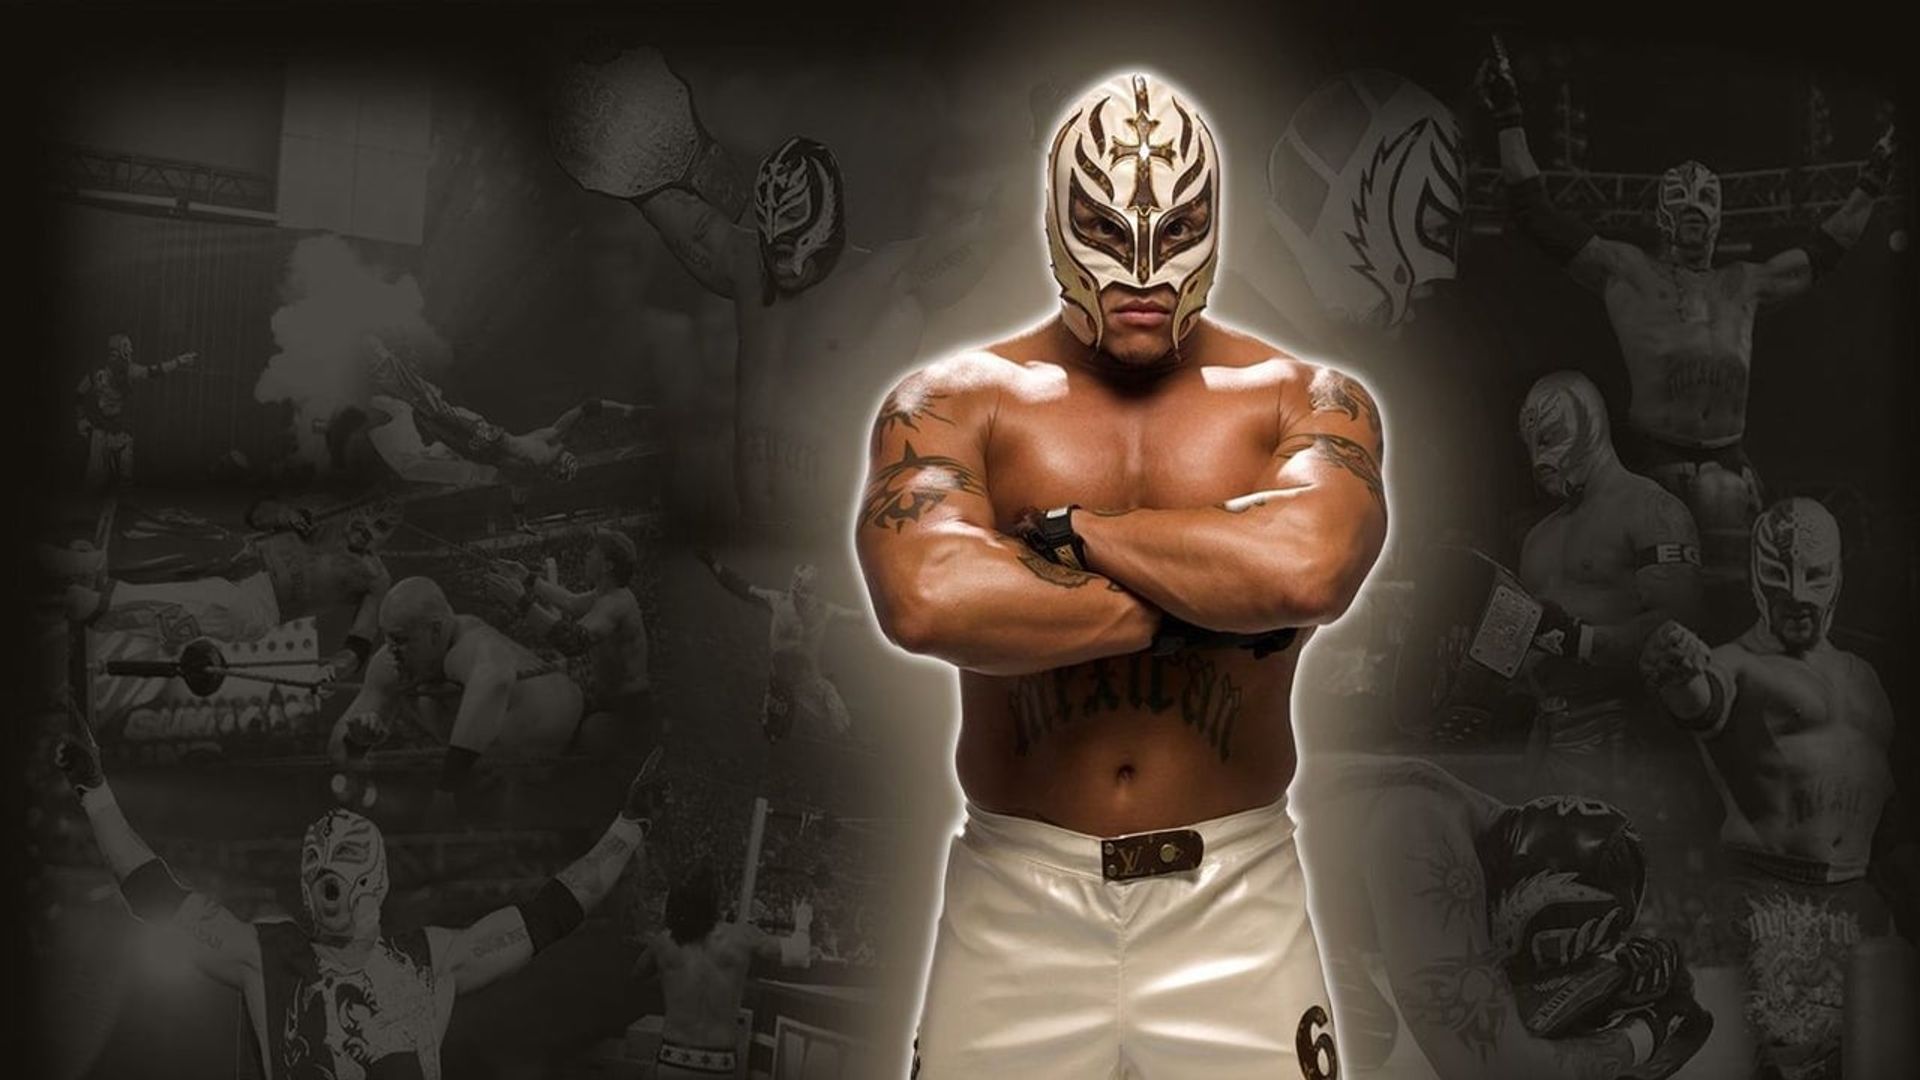 WWE: Rey Mysterio - The Life of a Masked Man background